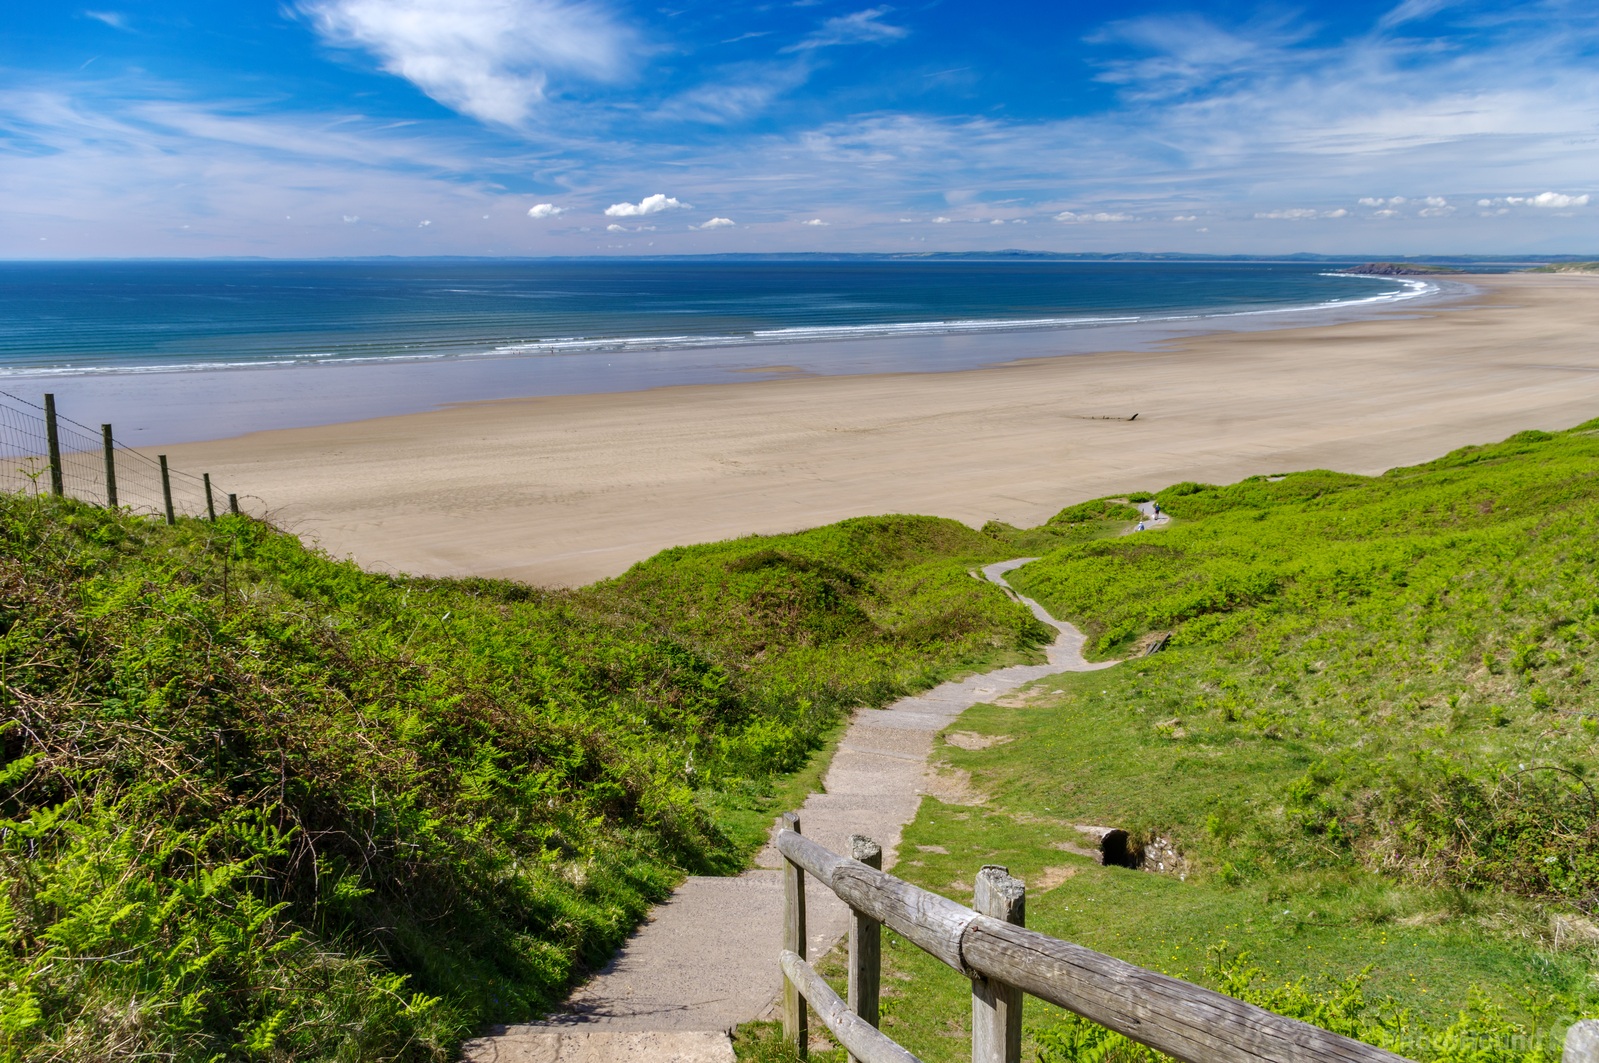 Image of Rhossili Beach by Terence Rees